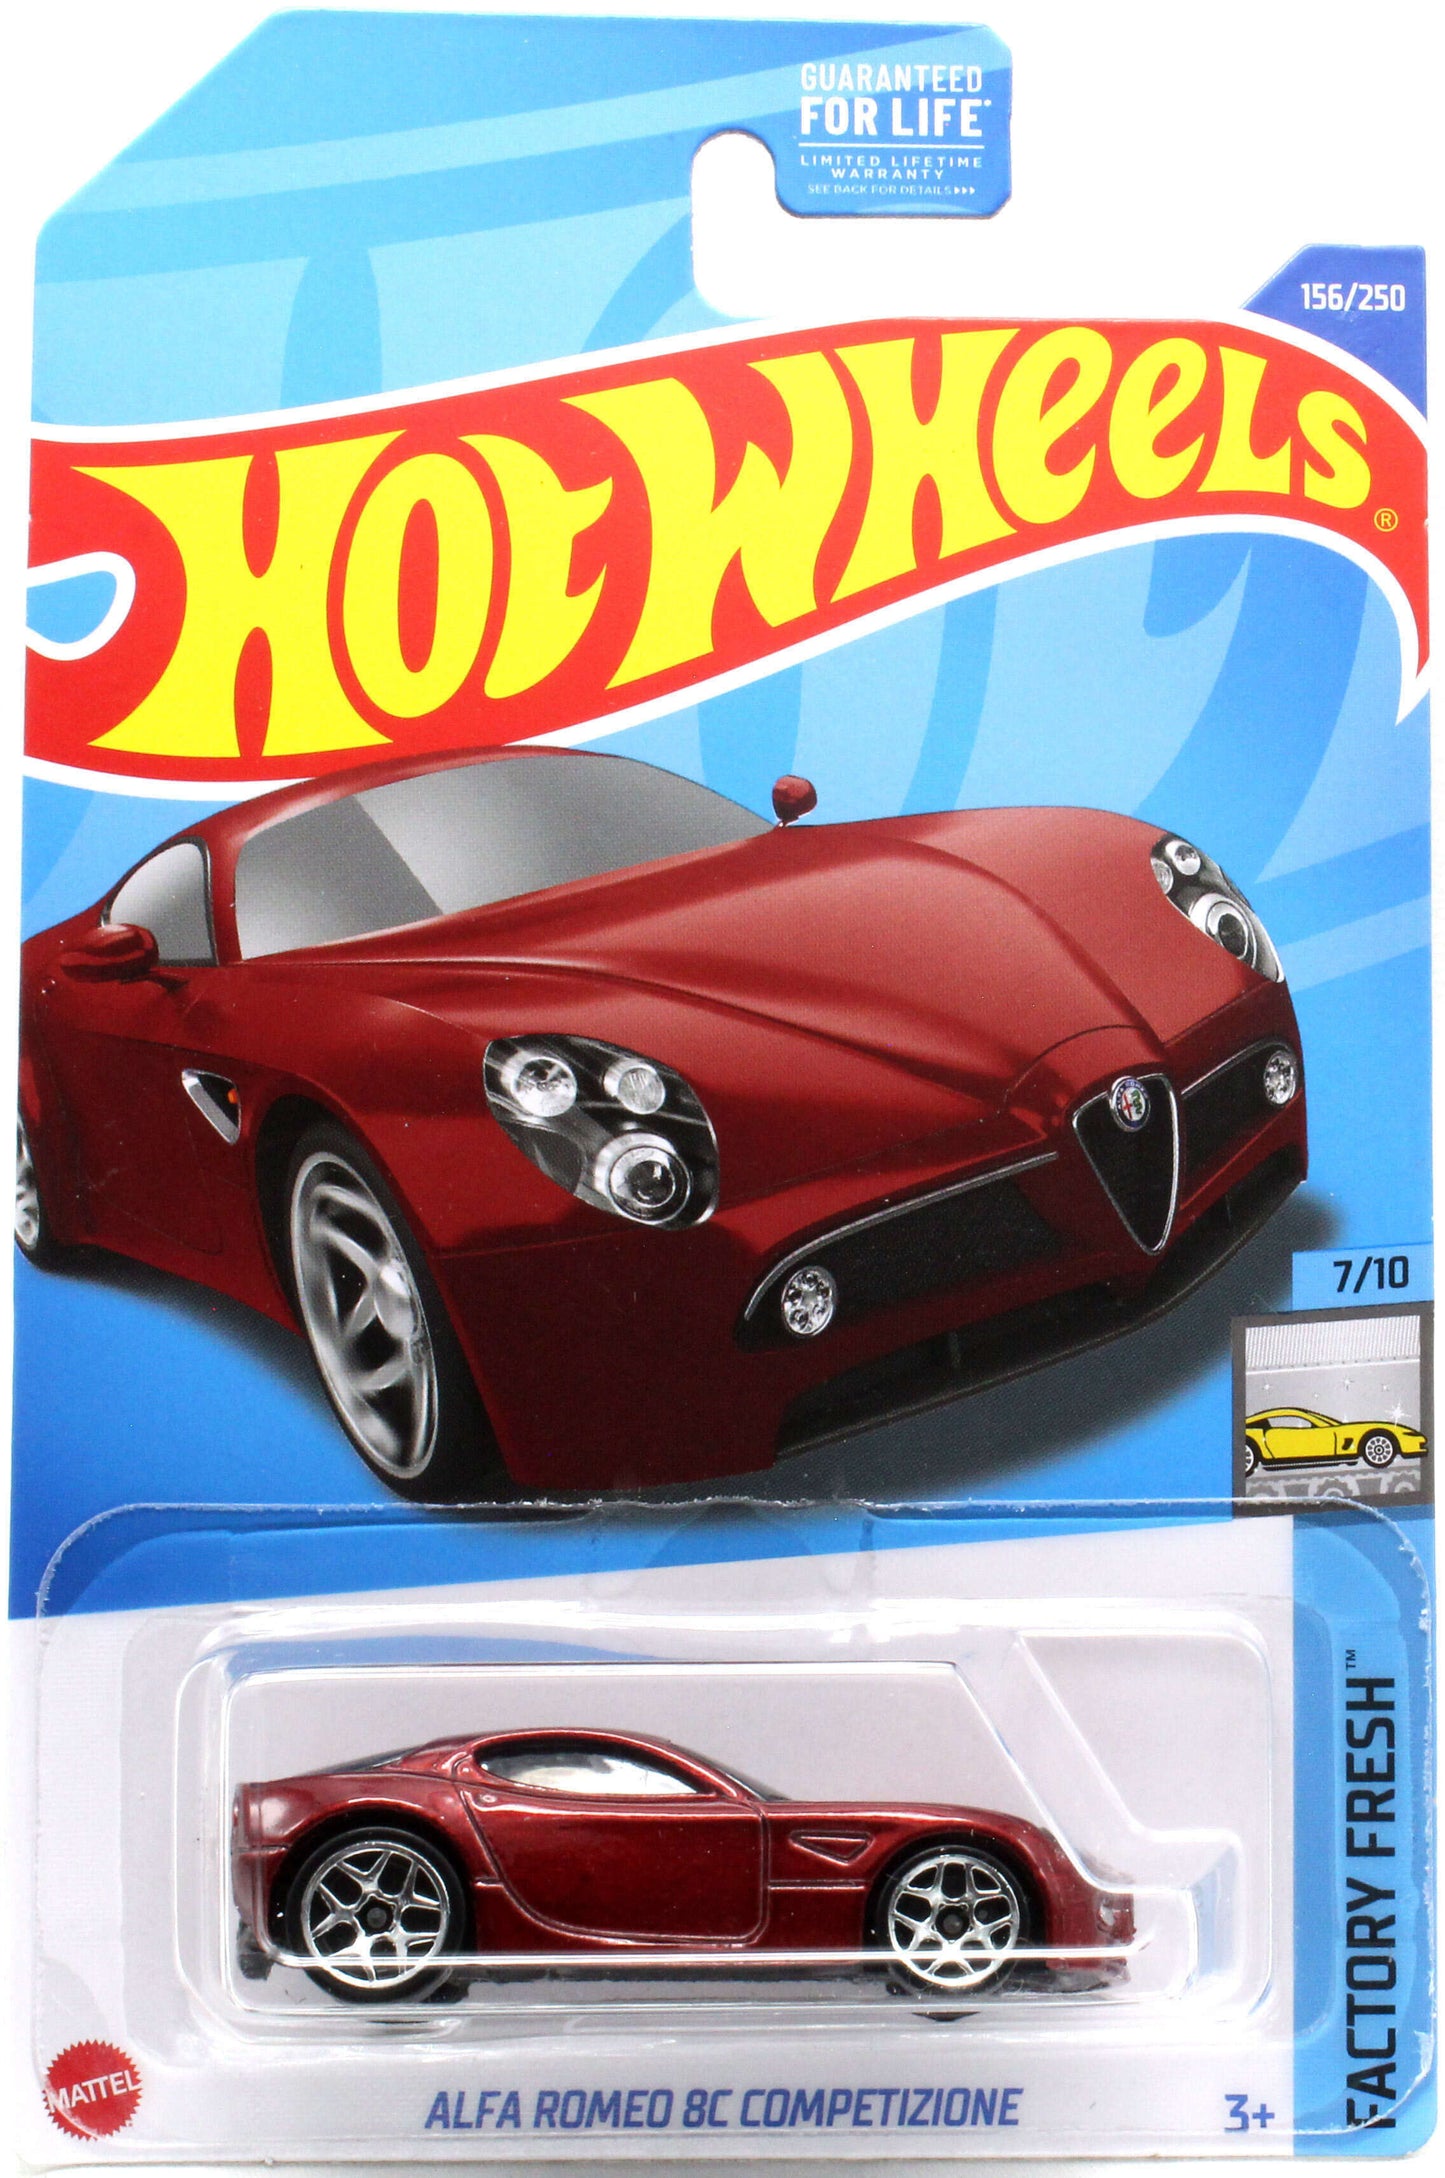 Hot Wheels 2022 - Collector # 156/250 - Factory Fresh 7/10 - Alfa Romeo BC Competizione - Red - Y5 Wheels